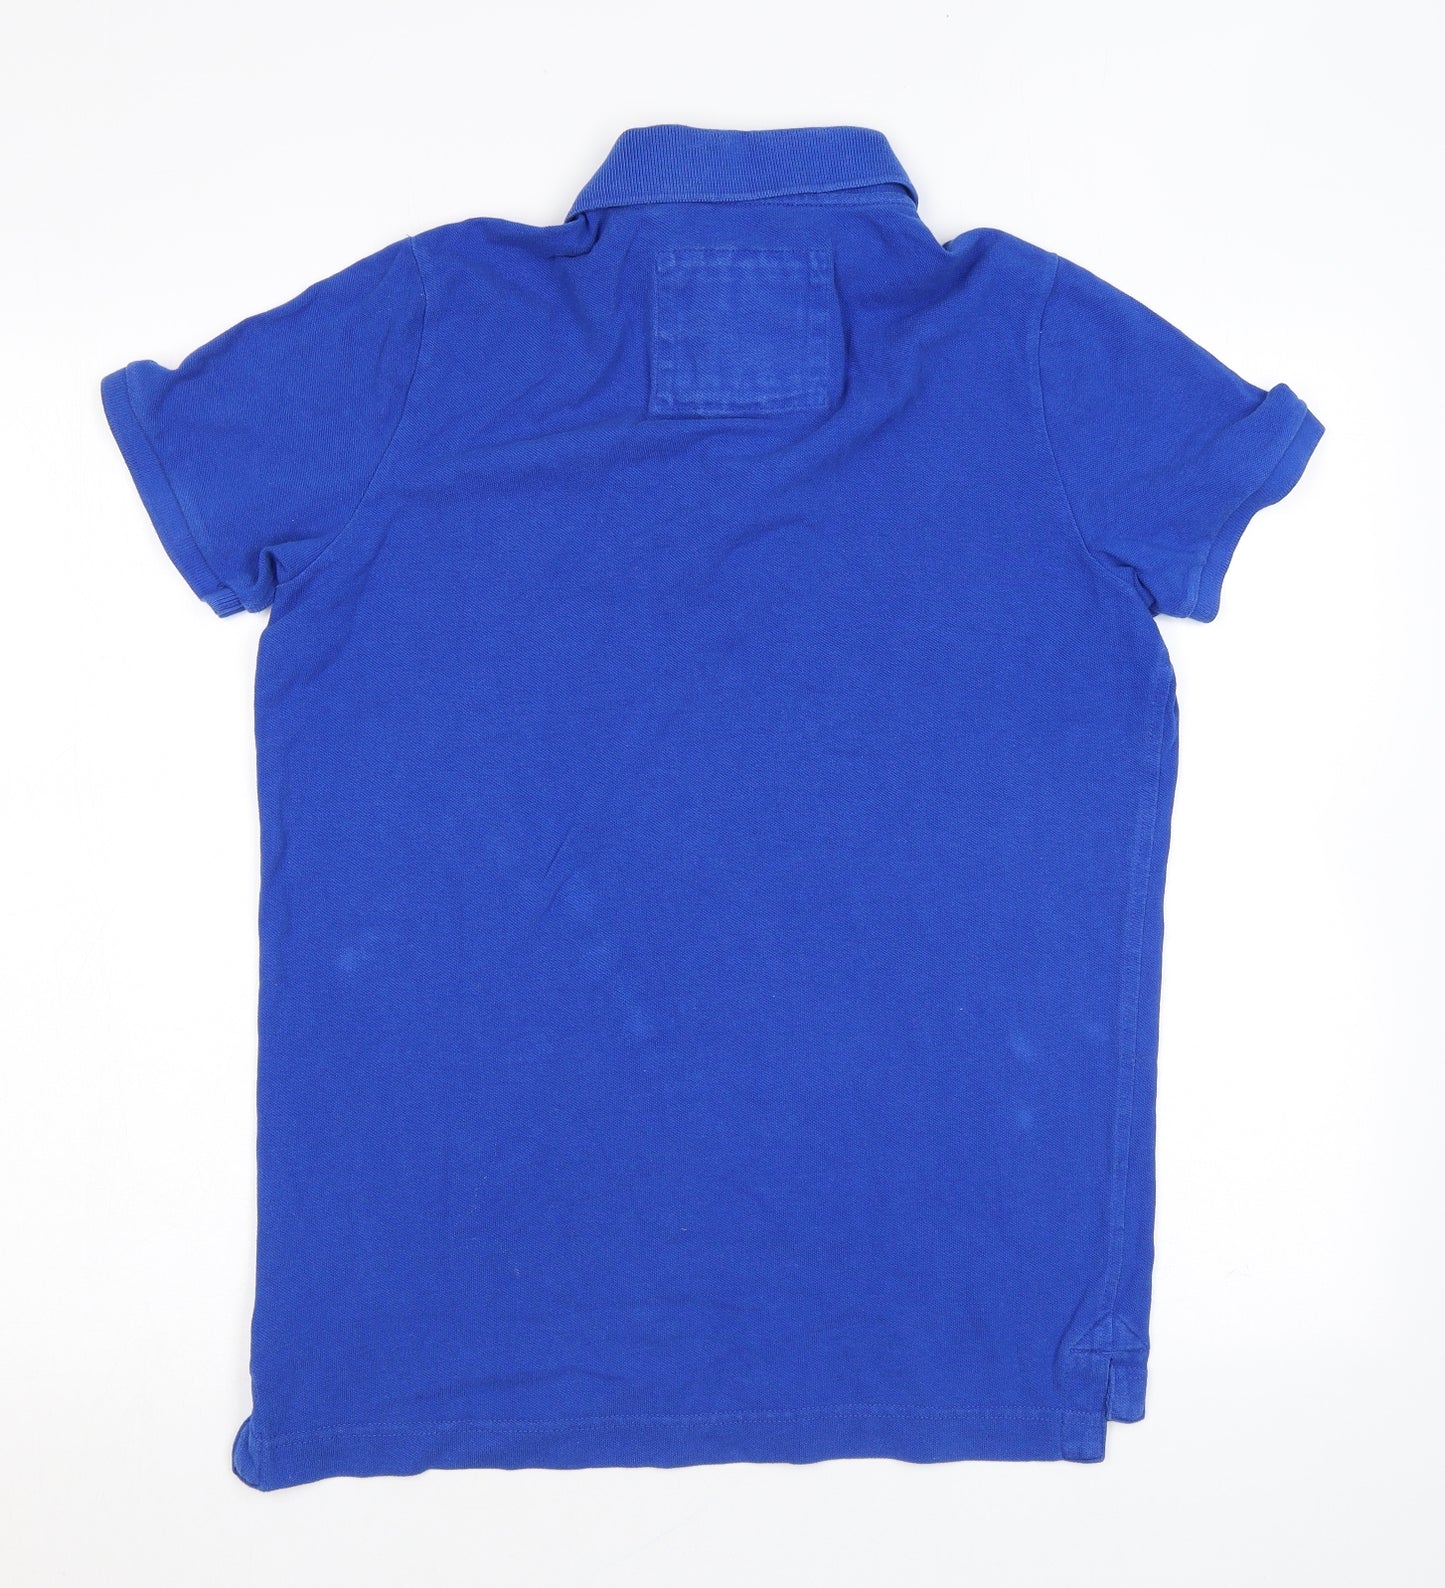 Abercrombie & Fitch Mens Blue Cotton Polo Size M Collared Button